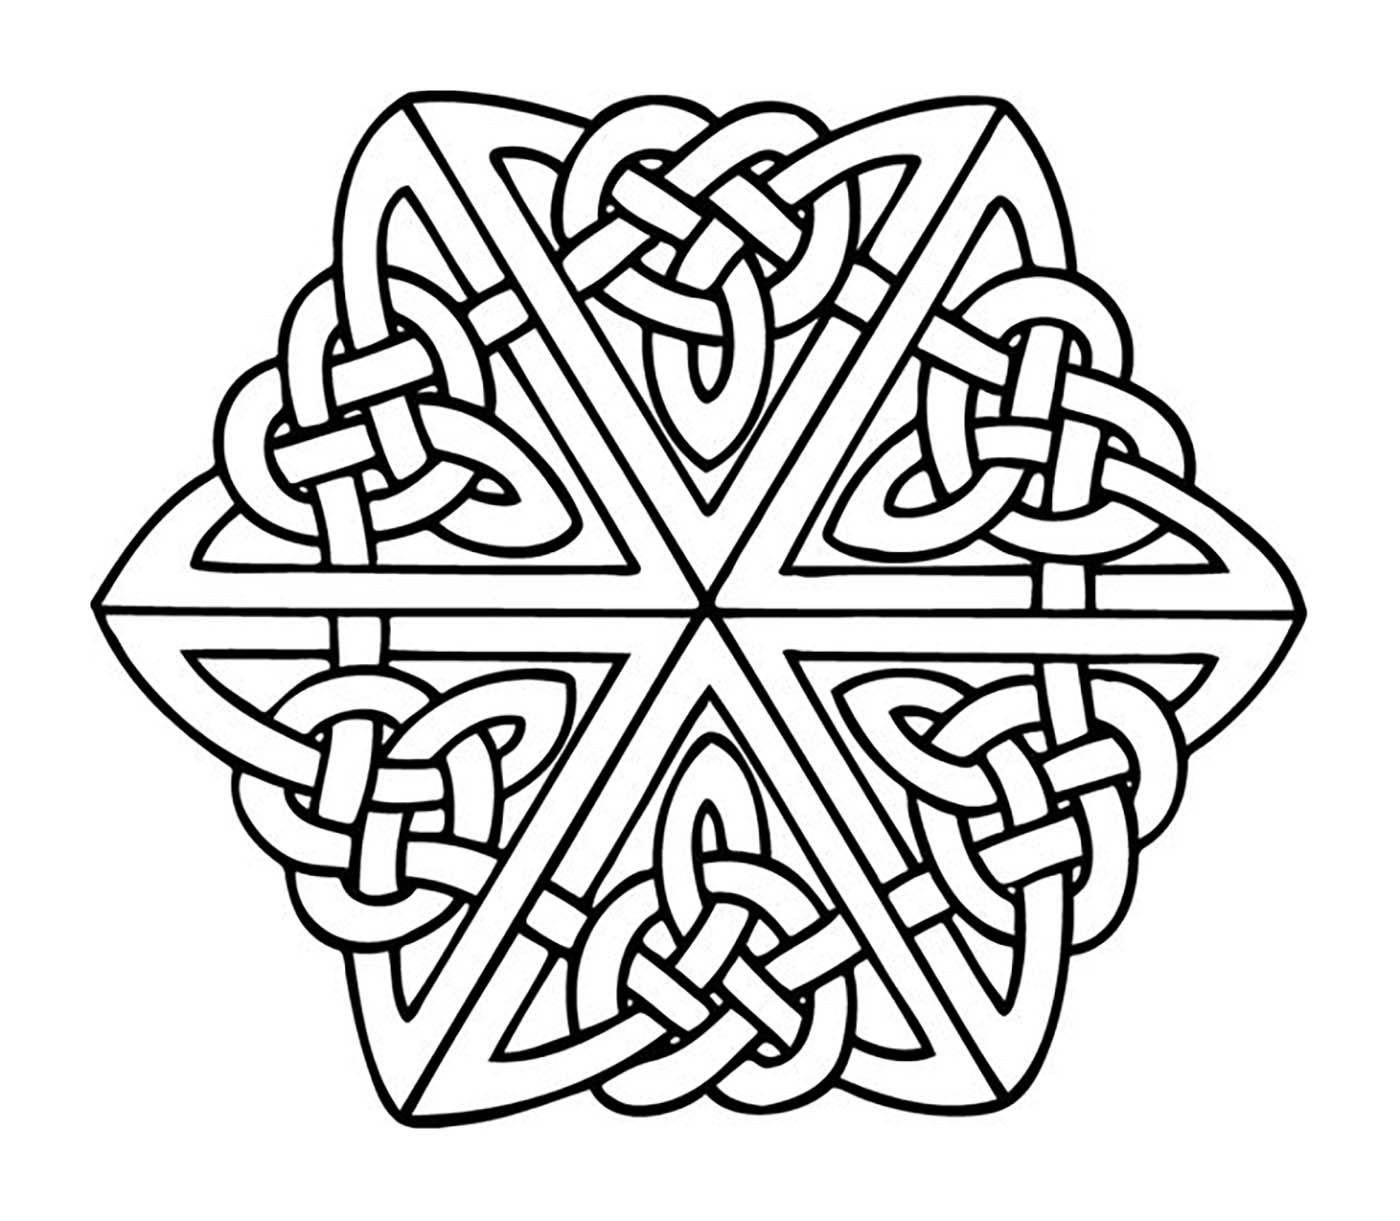 Intricate Design inspired by Celtic Art